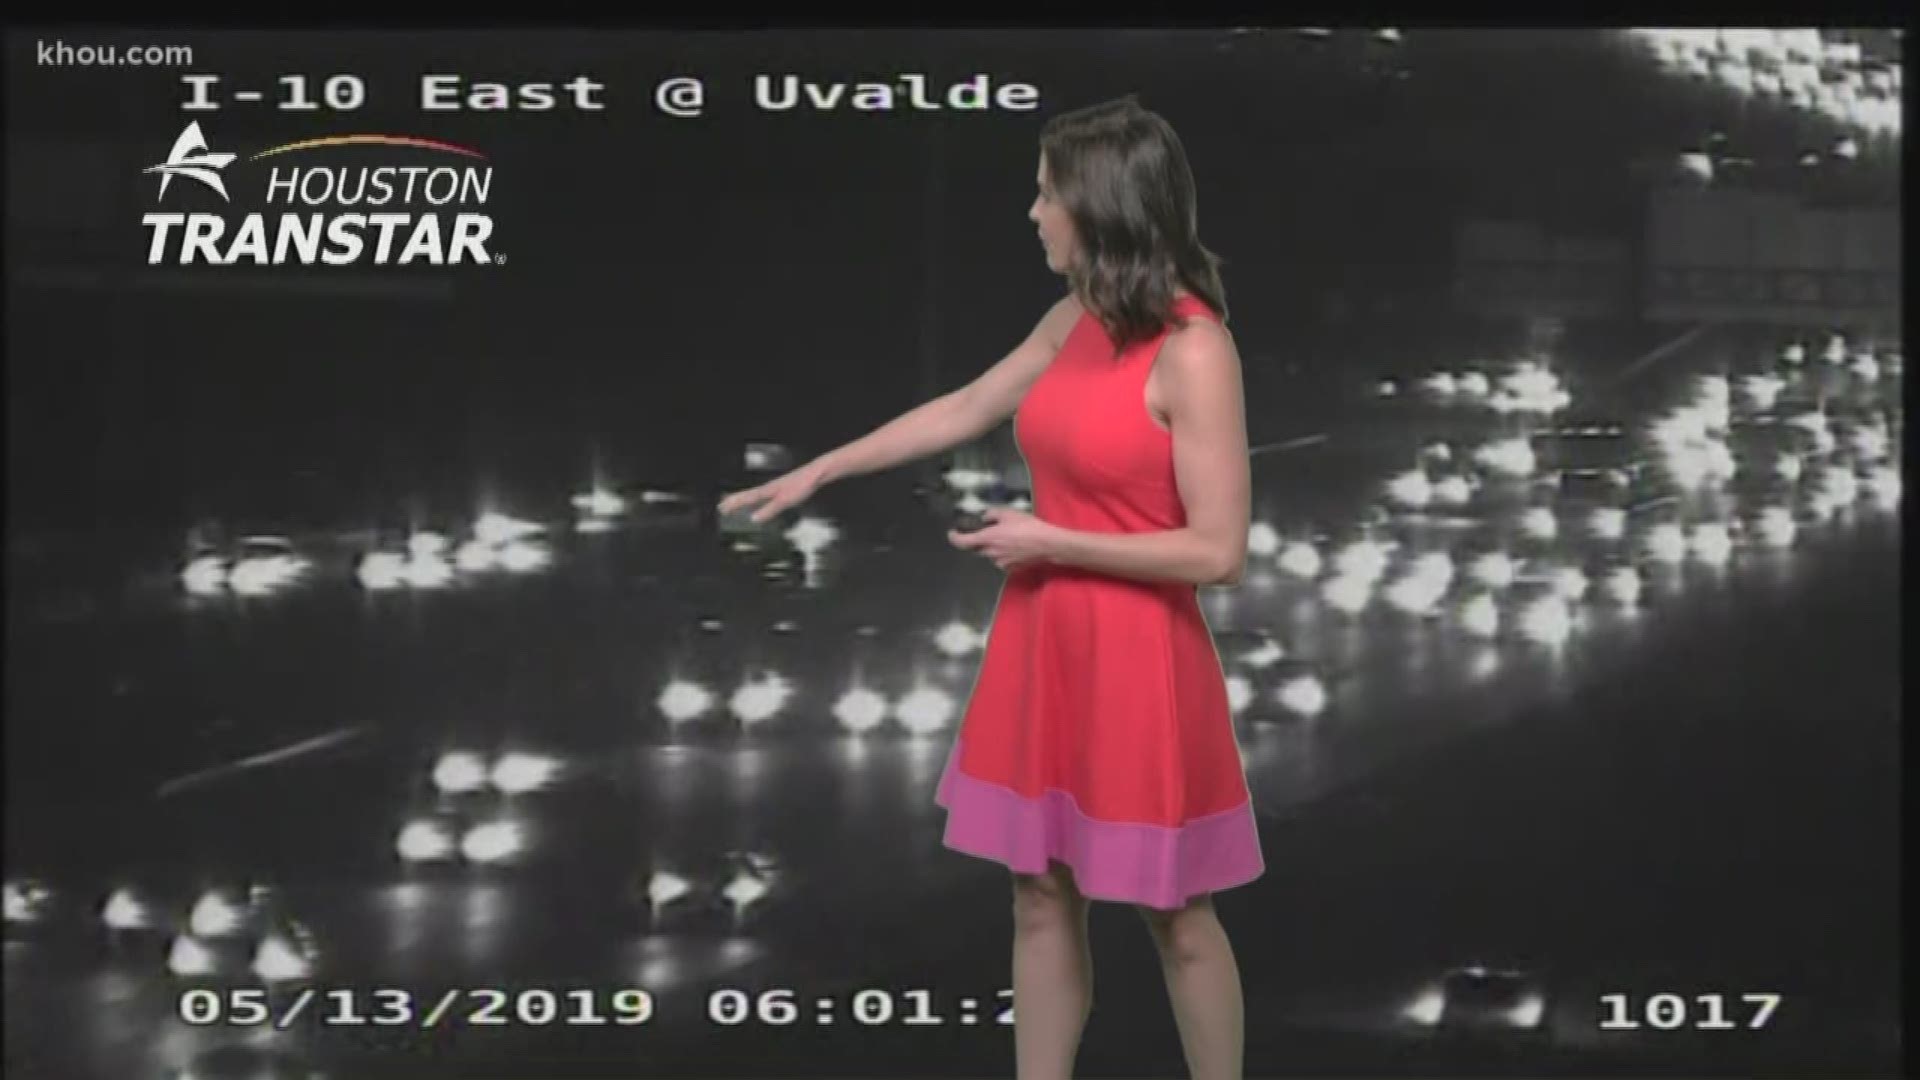 KHOU 11's Stephanie Simmons reports on a deadly crash on I-10 East at Uvalde on Monday, May 13, 2019.